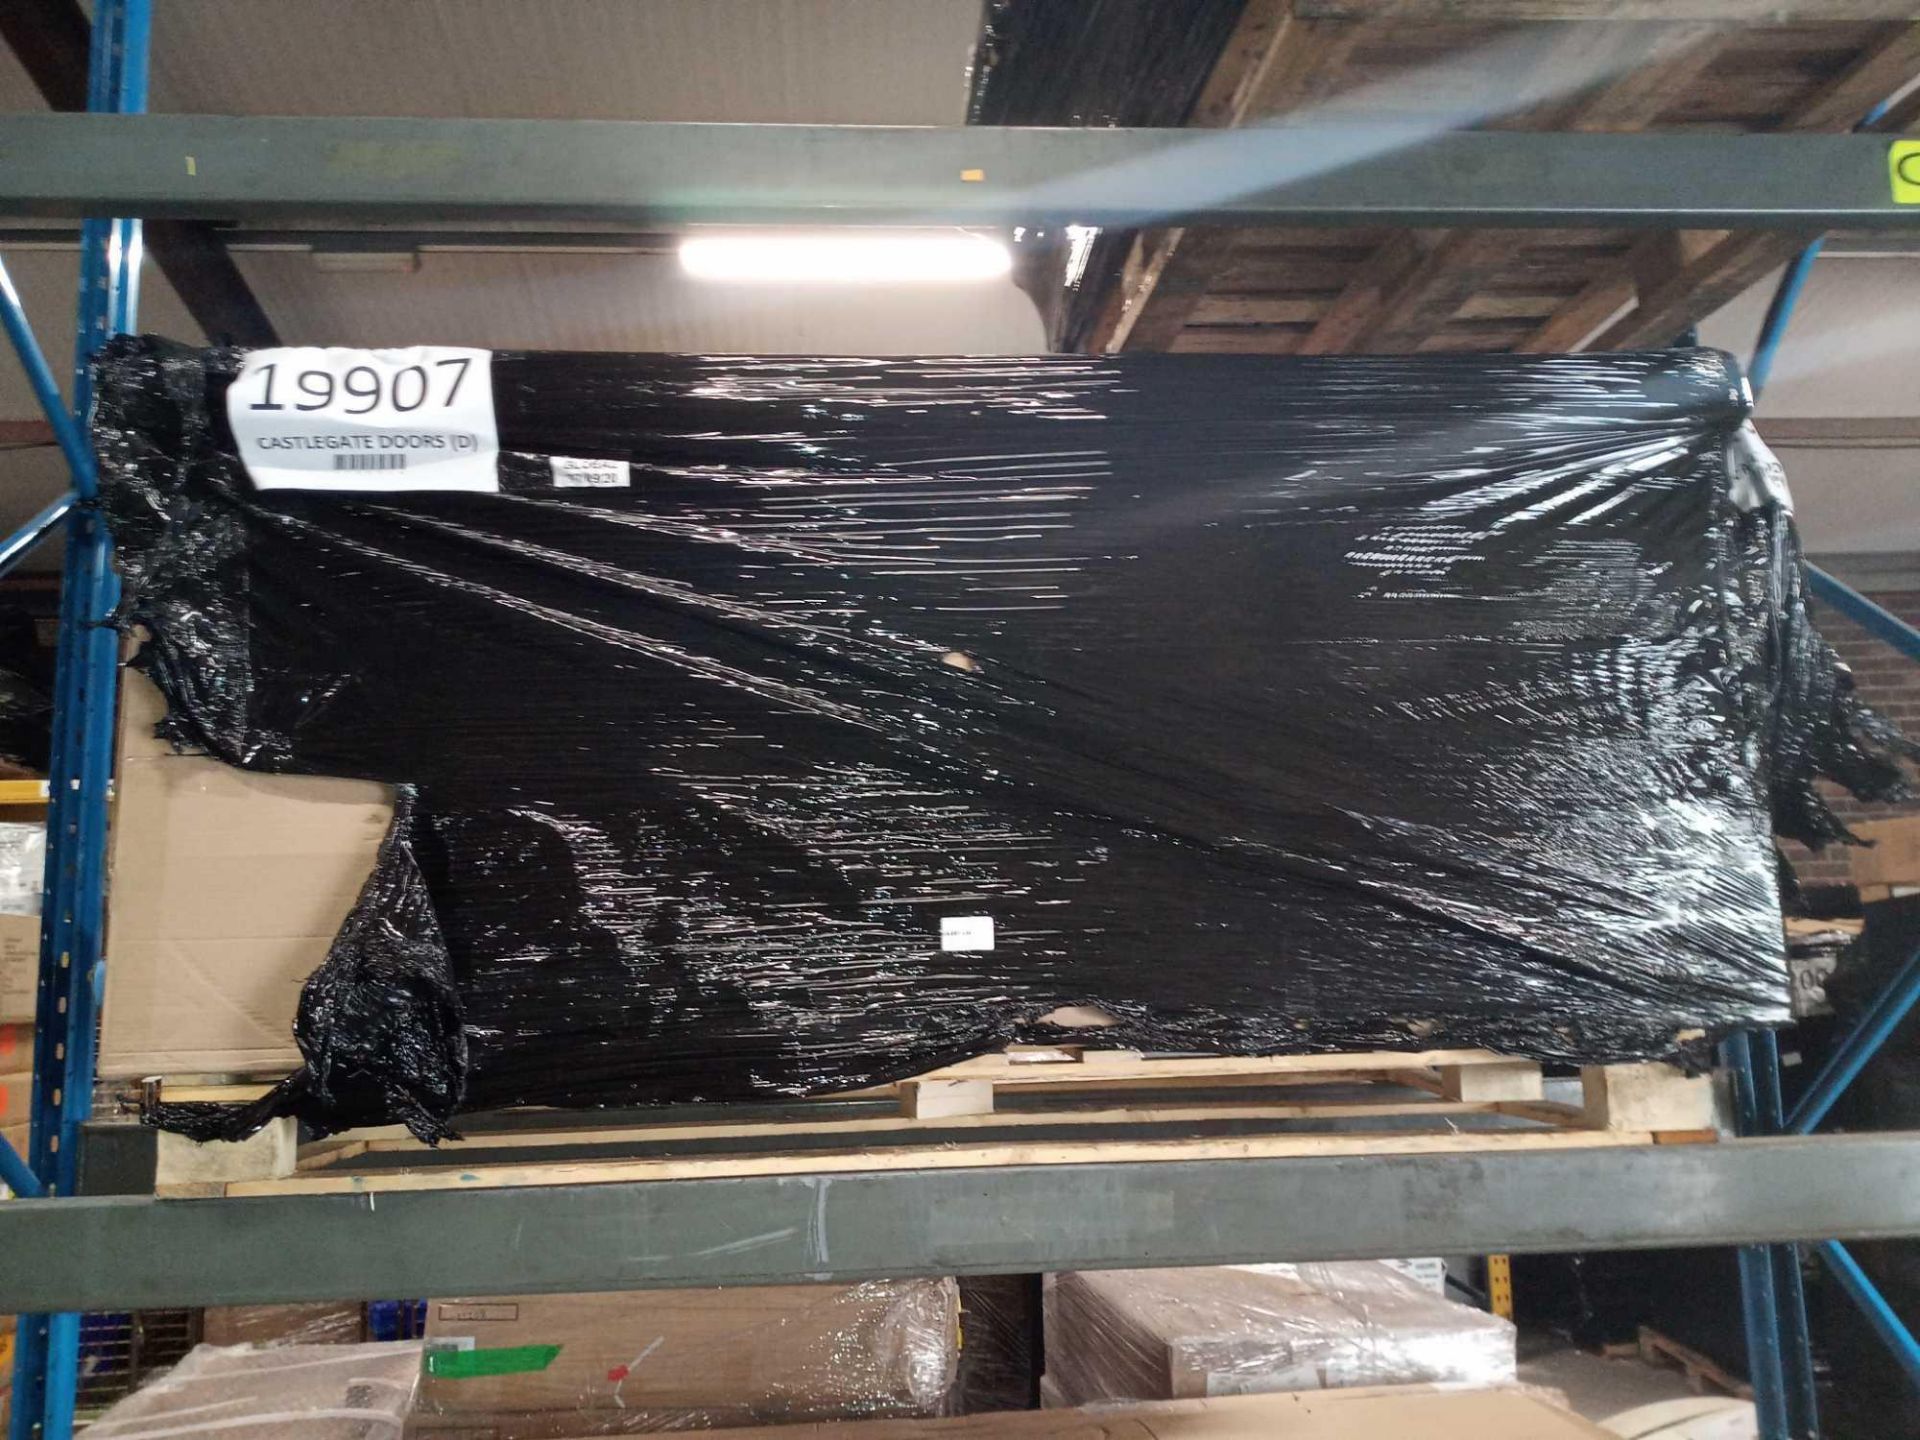 Rrp £1900 Pallet To Contain 17 Boxed Assorted Mdf And Internal Doors (See Description)